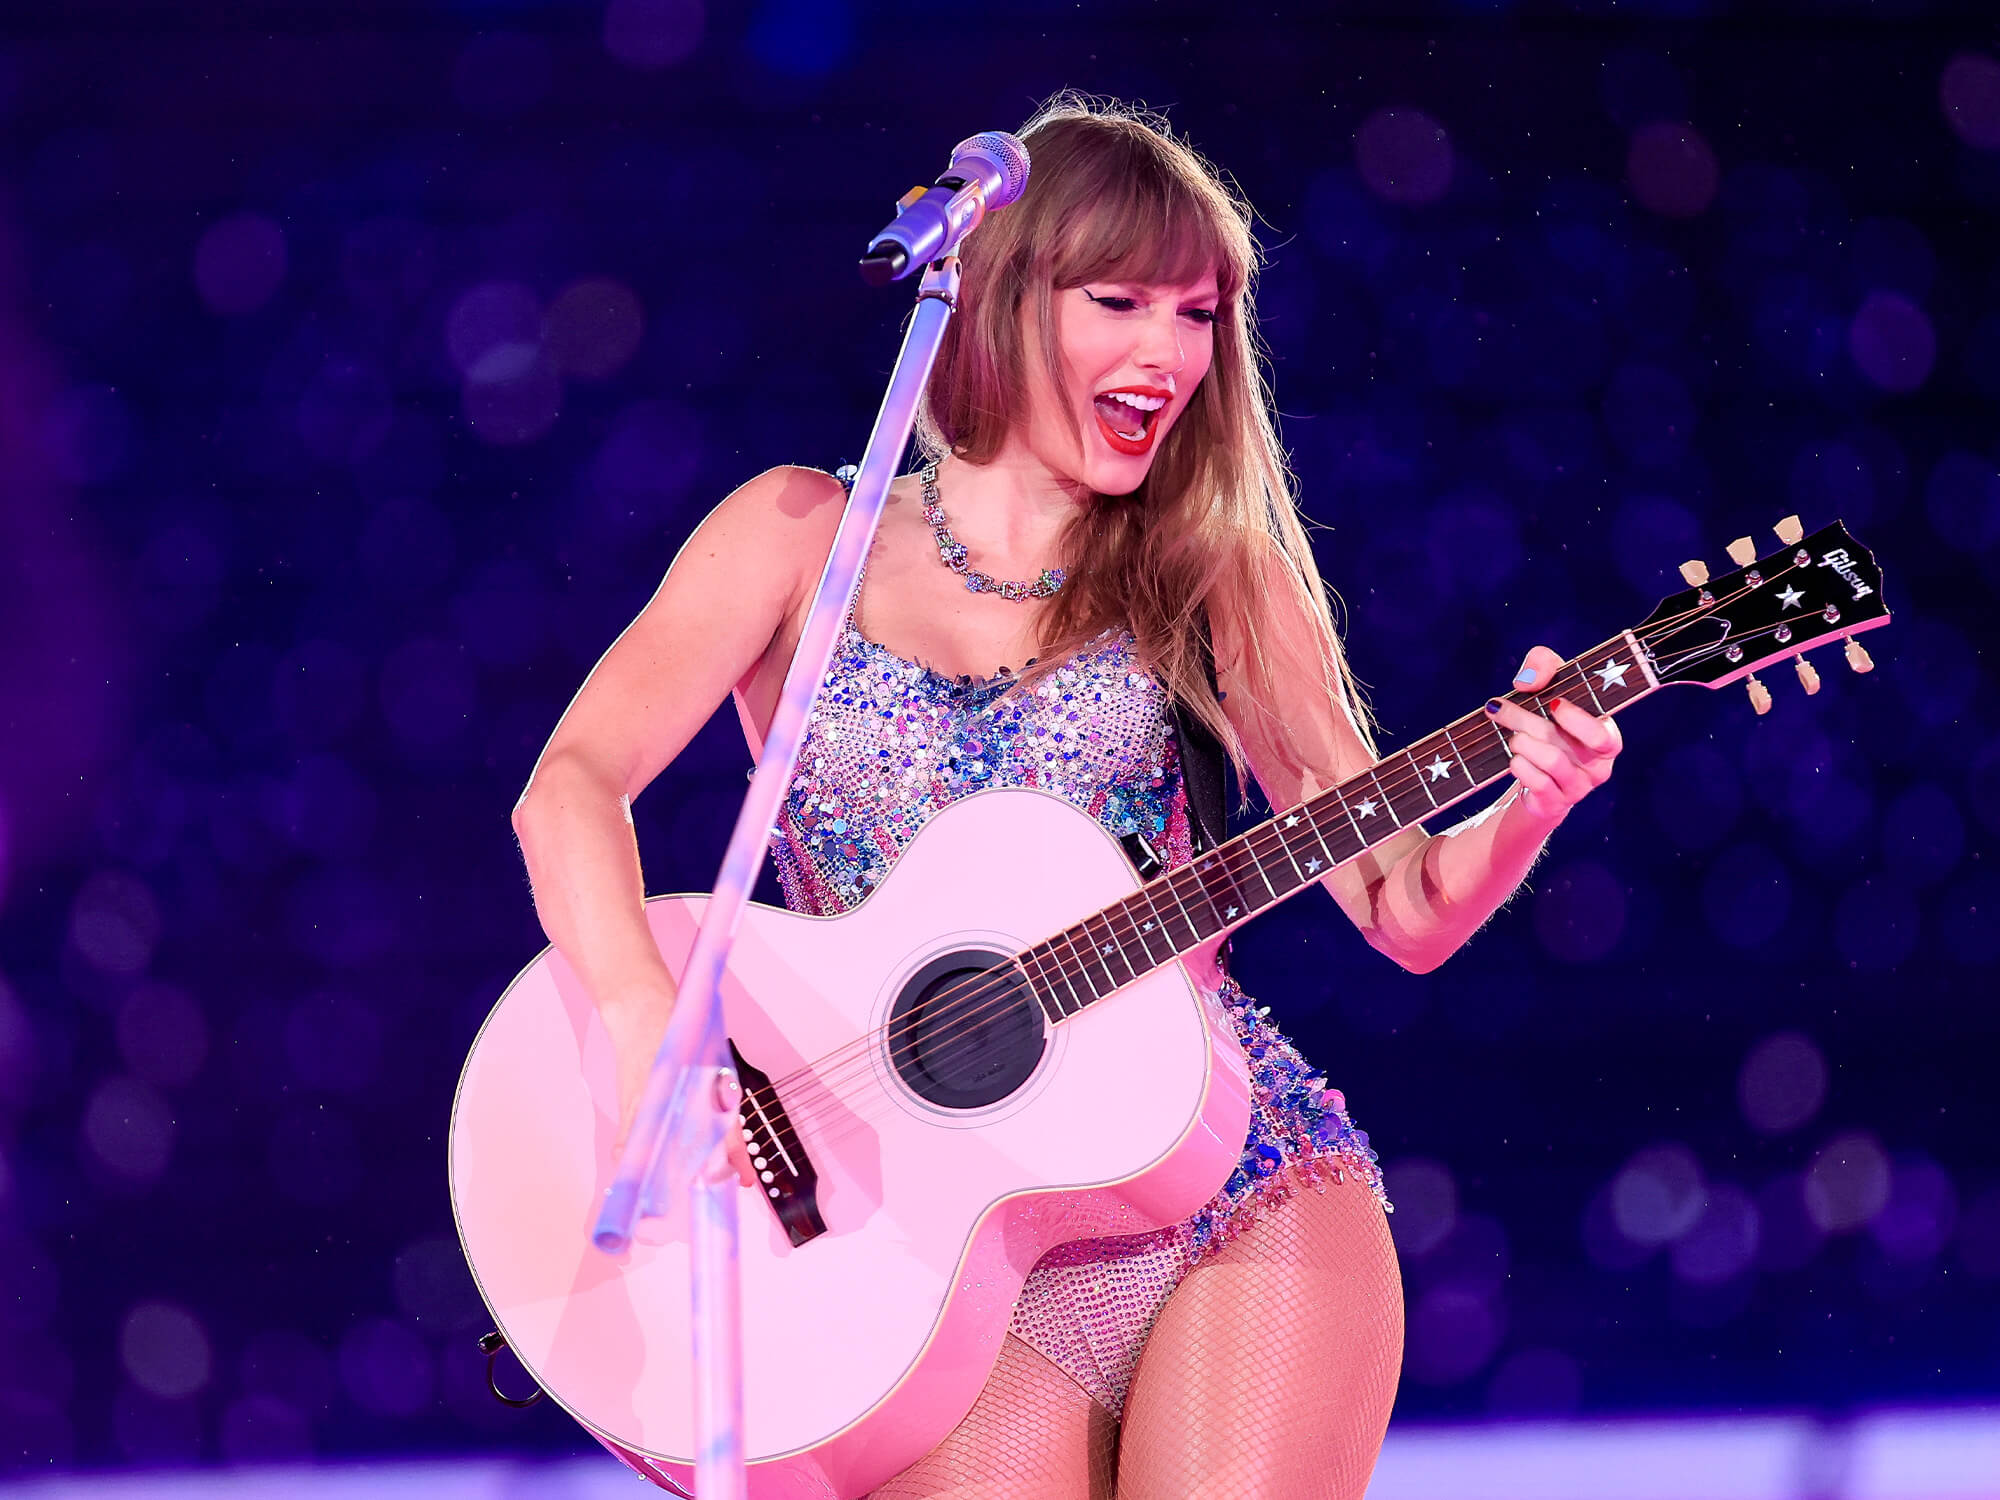 Taylor Swift playing a pink acoustic Gibson guitar on stage. She is wearing a bejewelled body suit, showing an open-mouth smile, and has long blonde hair and red lipstick.